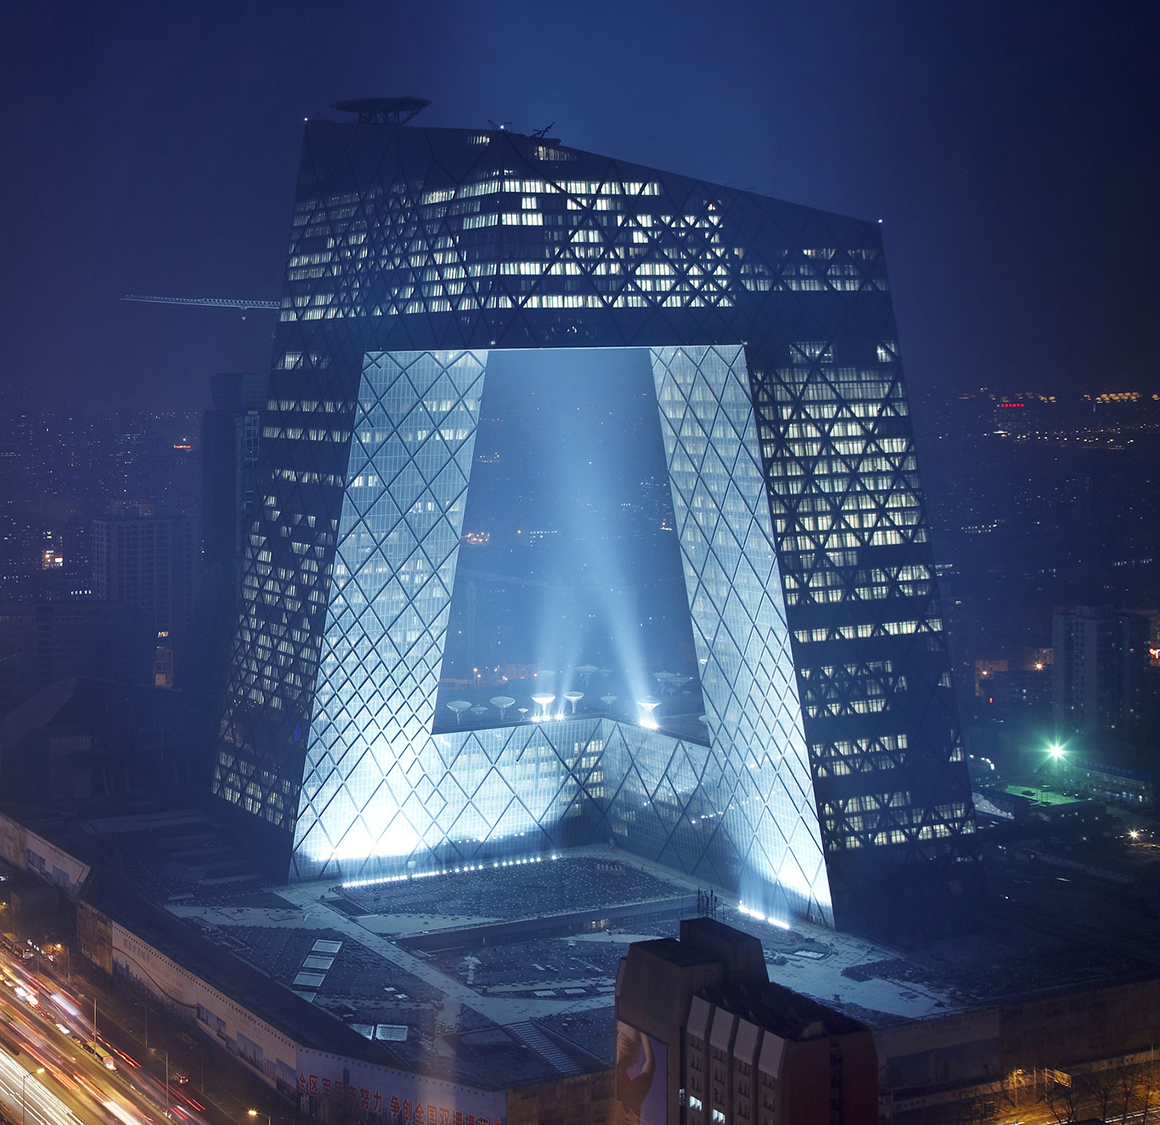 This is China Central Television HQ in Beijing, the world's first 'looped' skyscraper.

Some say it's the greatest building of the 21st century, and others, including Xi Jinping, have called it weird.

Either way, CCTV HQ has (accidentally) inspired an architectural revolution...